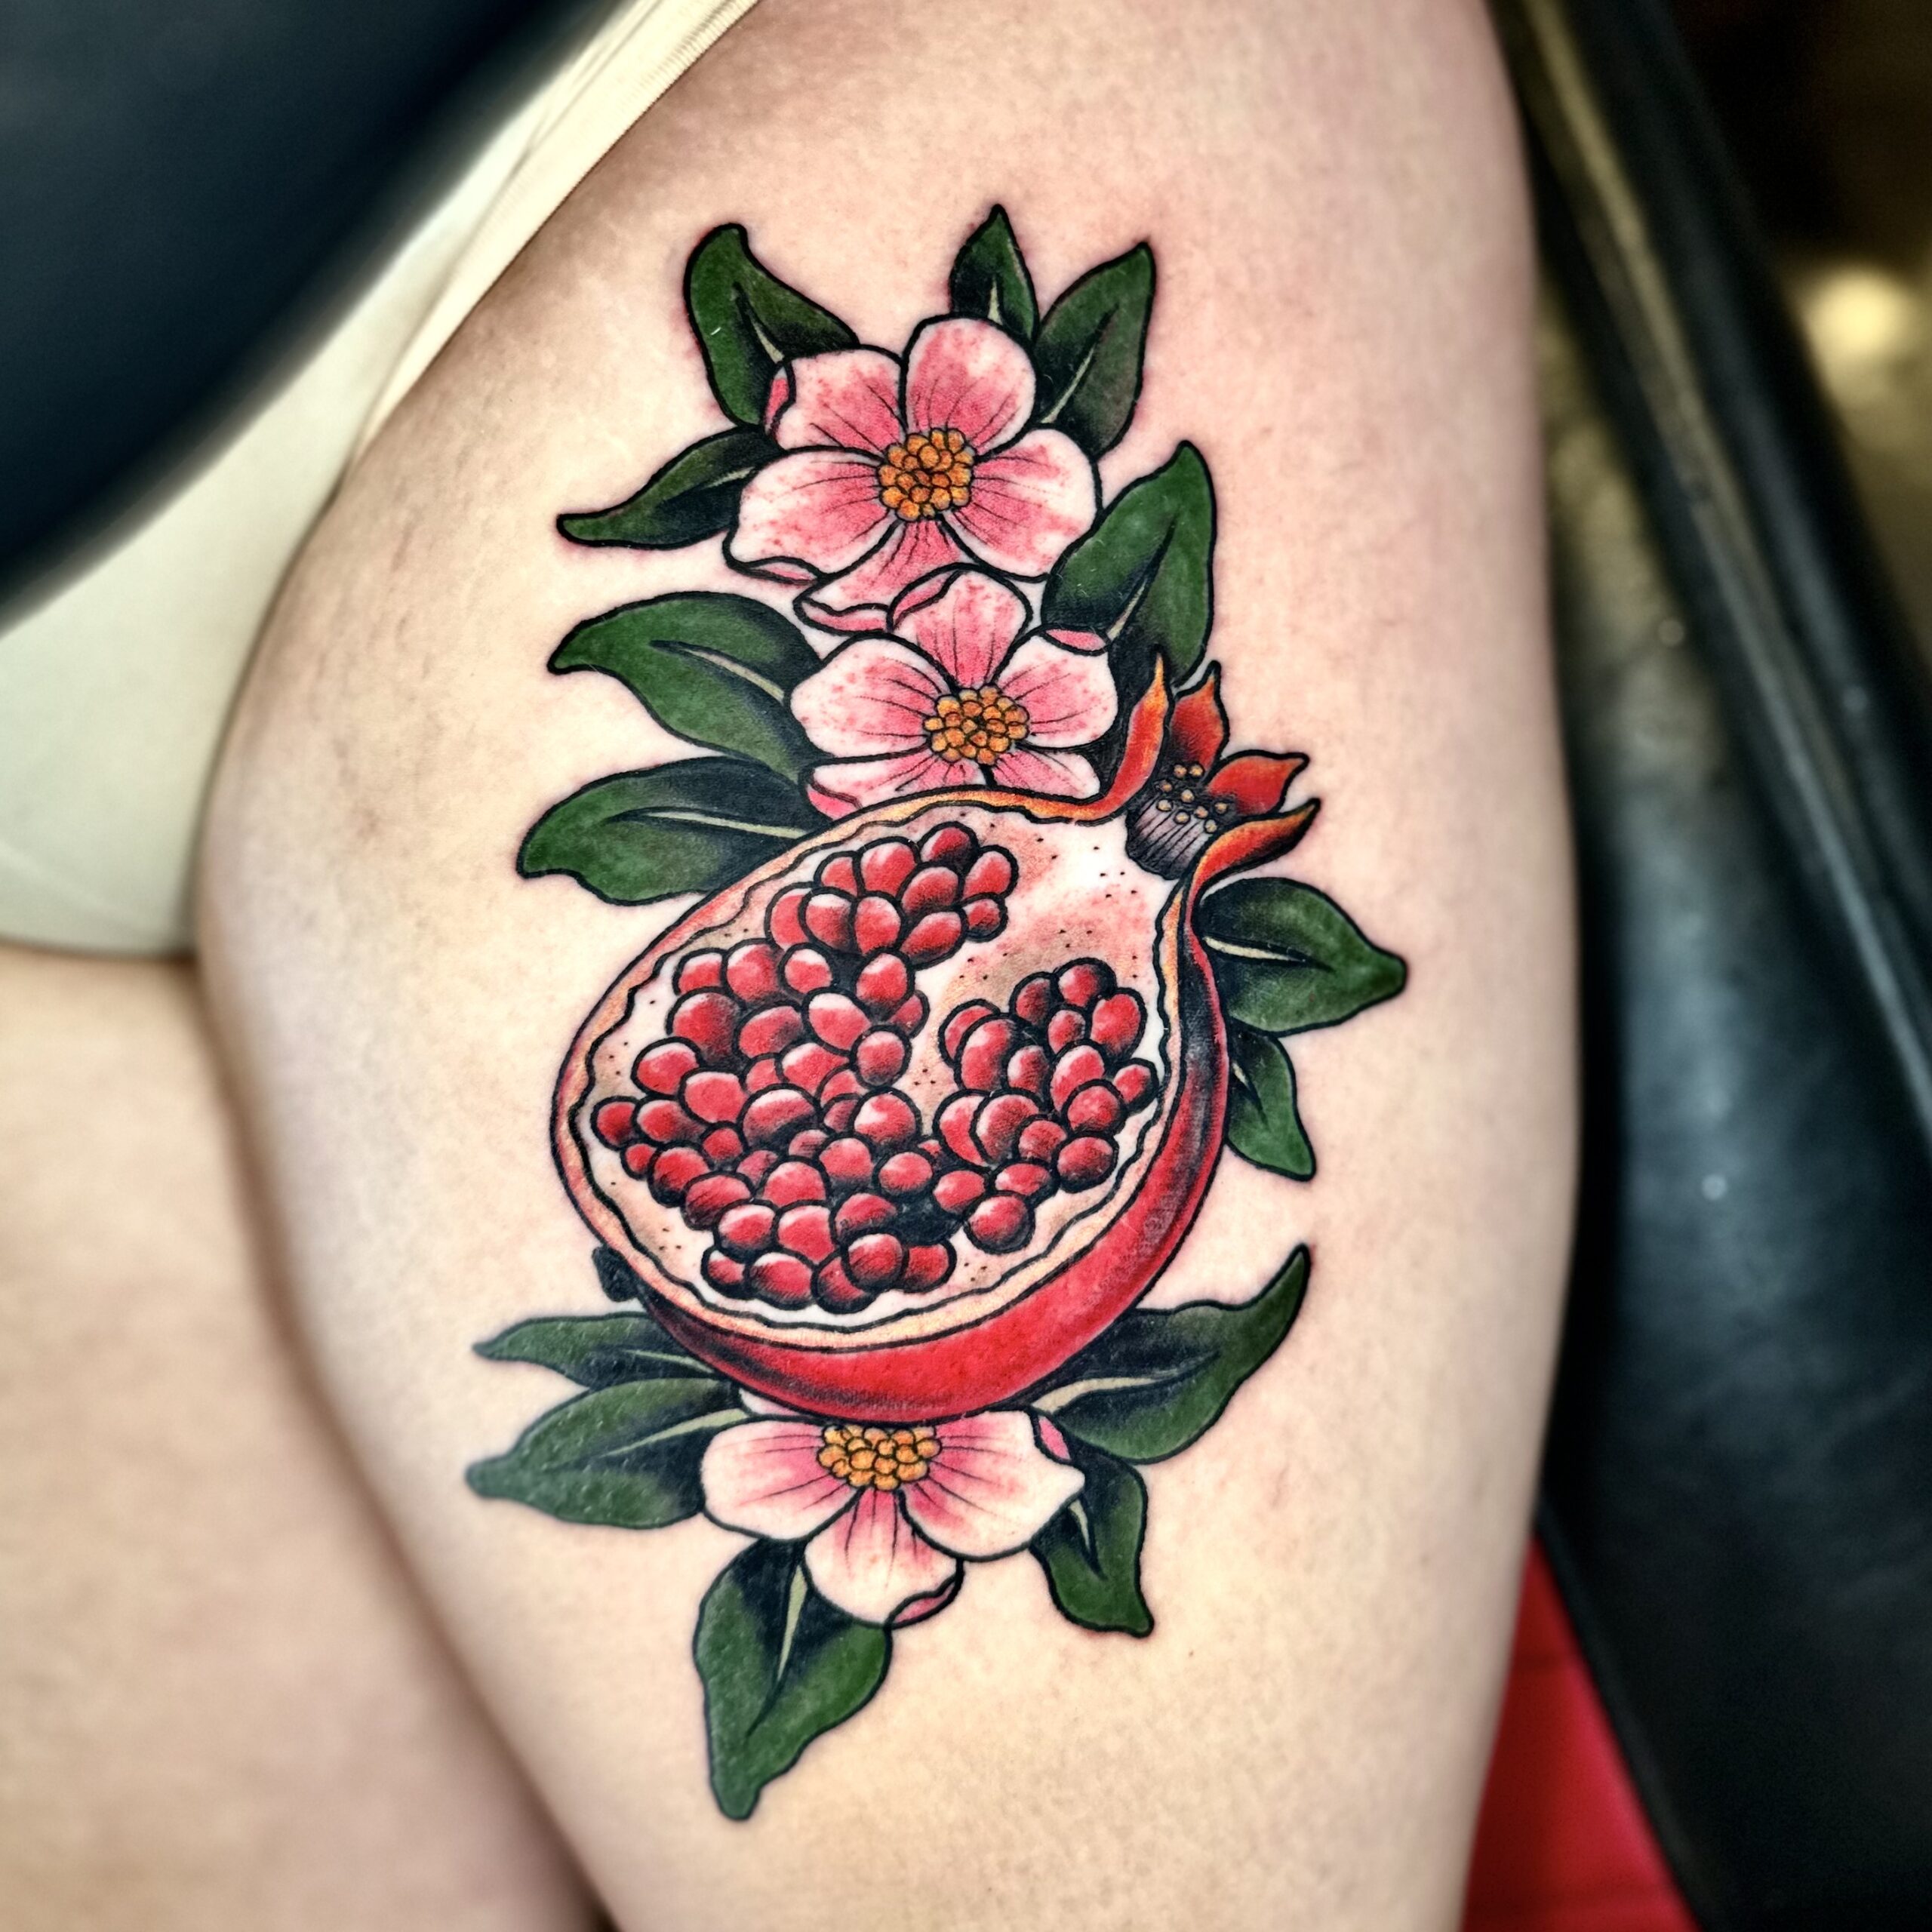 Tattoo of a pomegranate and some flowers from DFW tattoo shop